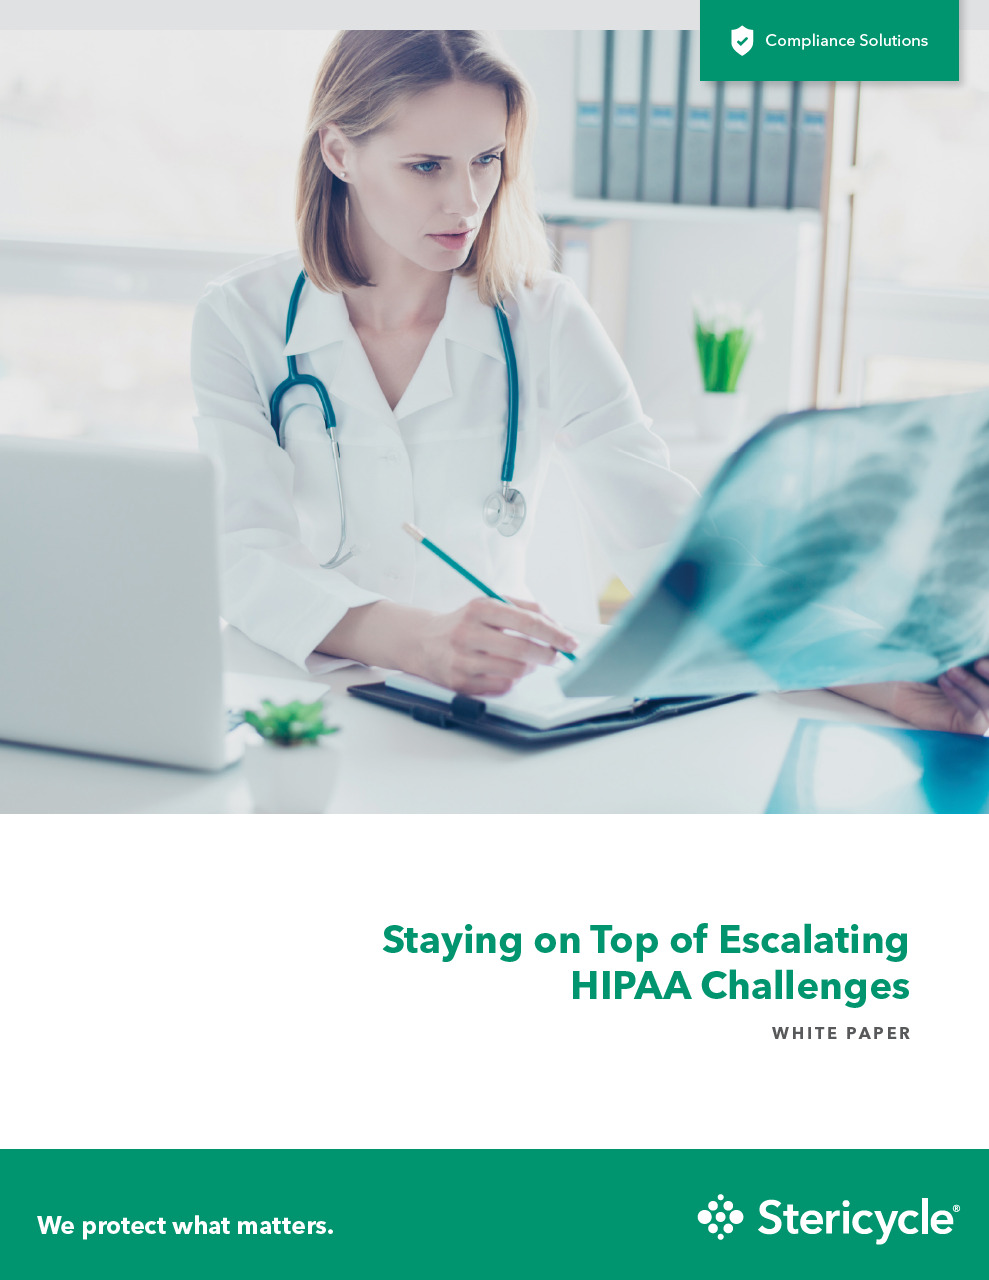 Staying-on-Top-of-HIPAA-Challenges_White-Paper_2019-03.pdf